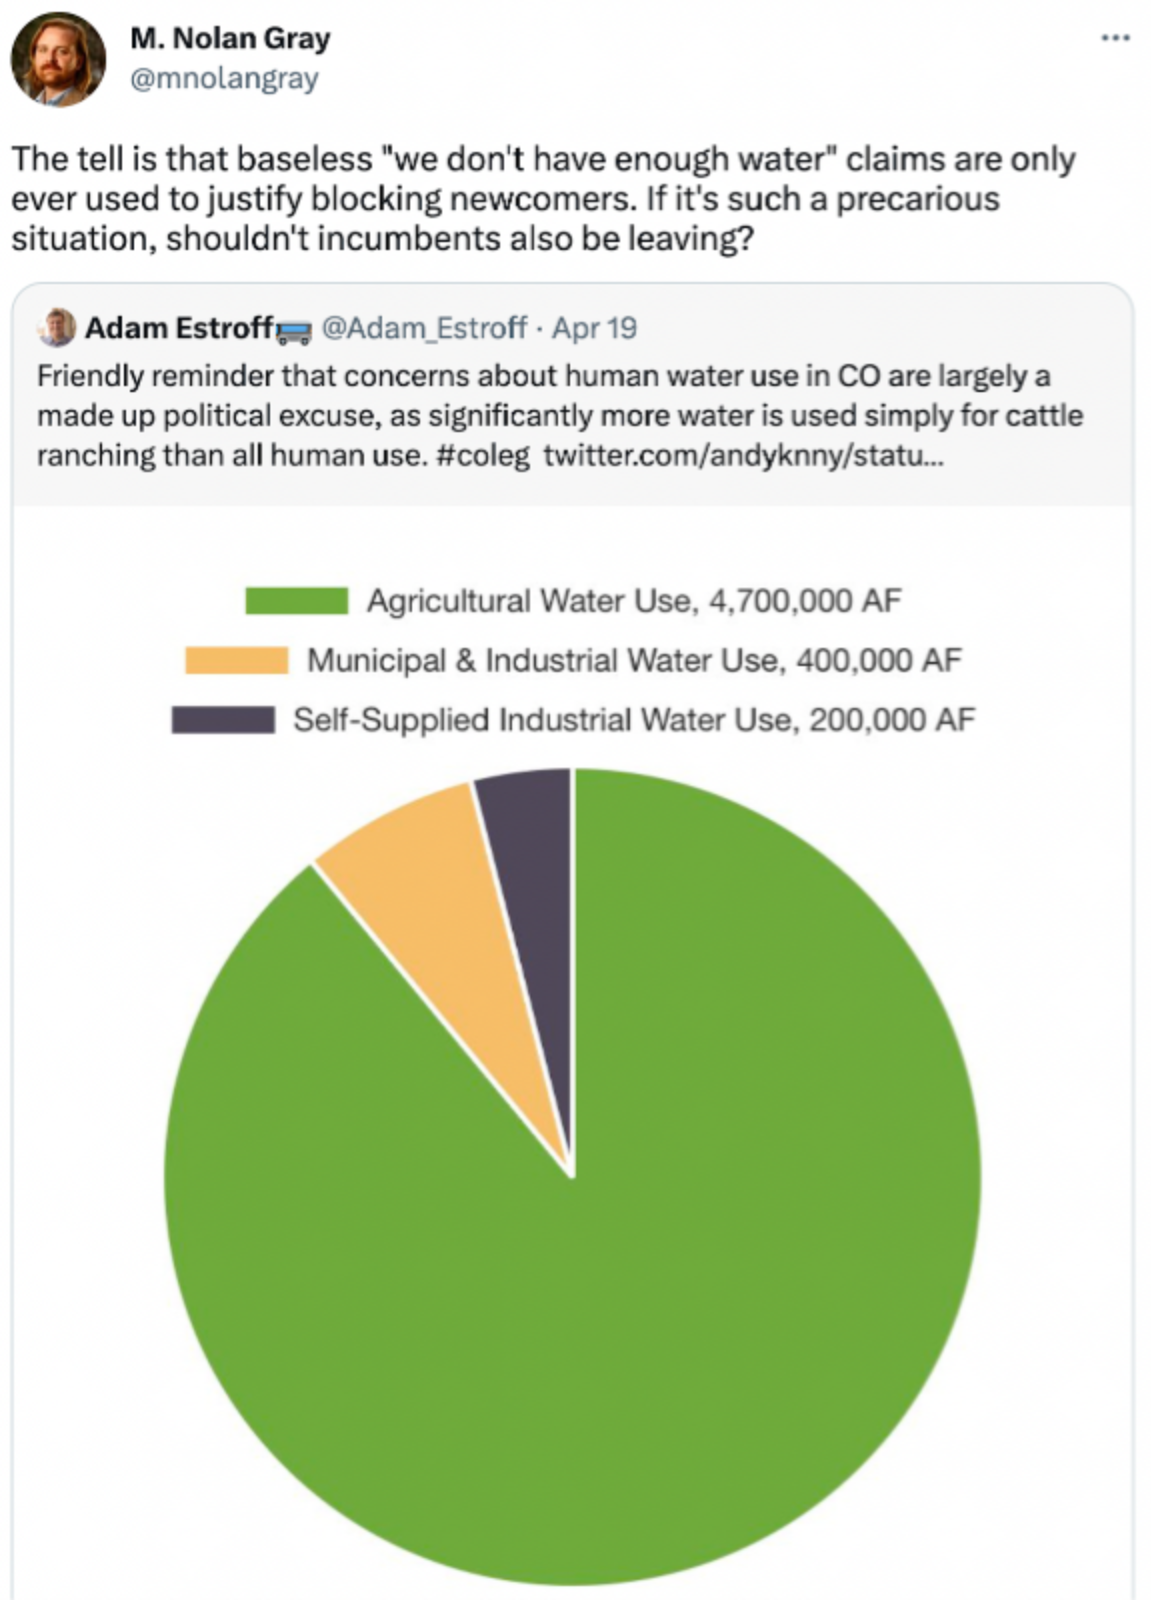 The tell is that baseless "we don't have enough water" claims are only ever used to justify blocking newcomers. If it's such a precarious situation, shouldn't incumbents also be leaving? https://t.co/KyIJXRMjMH